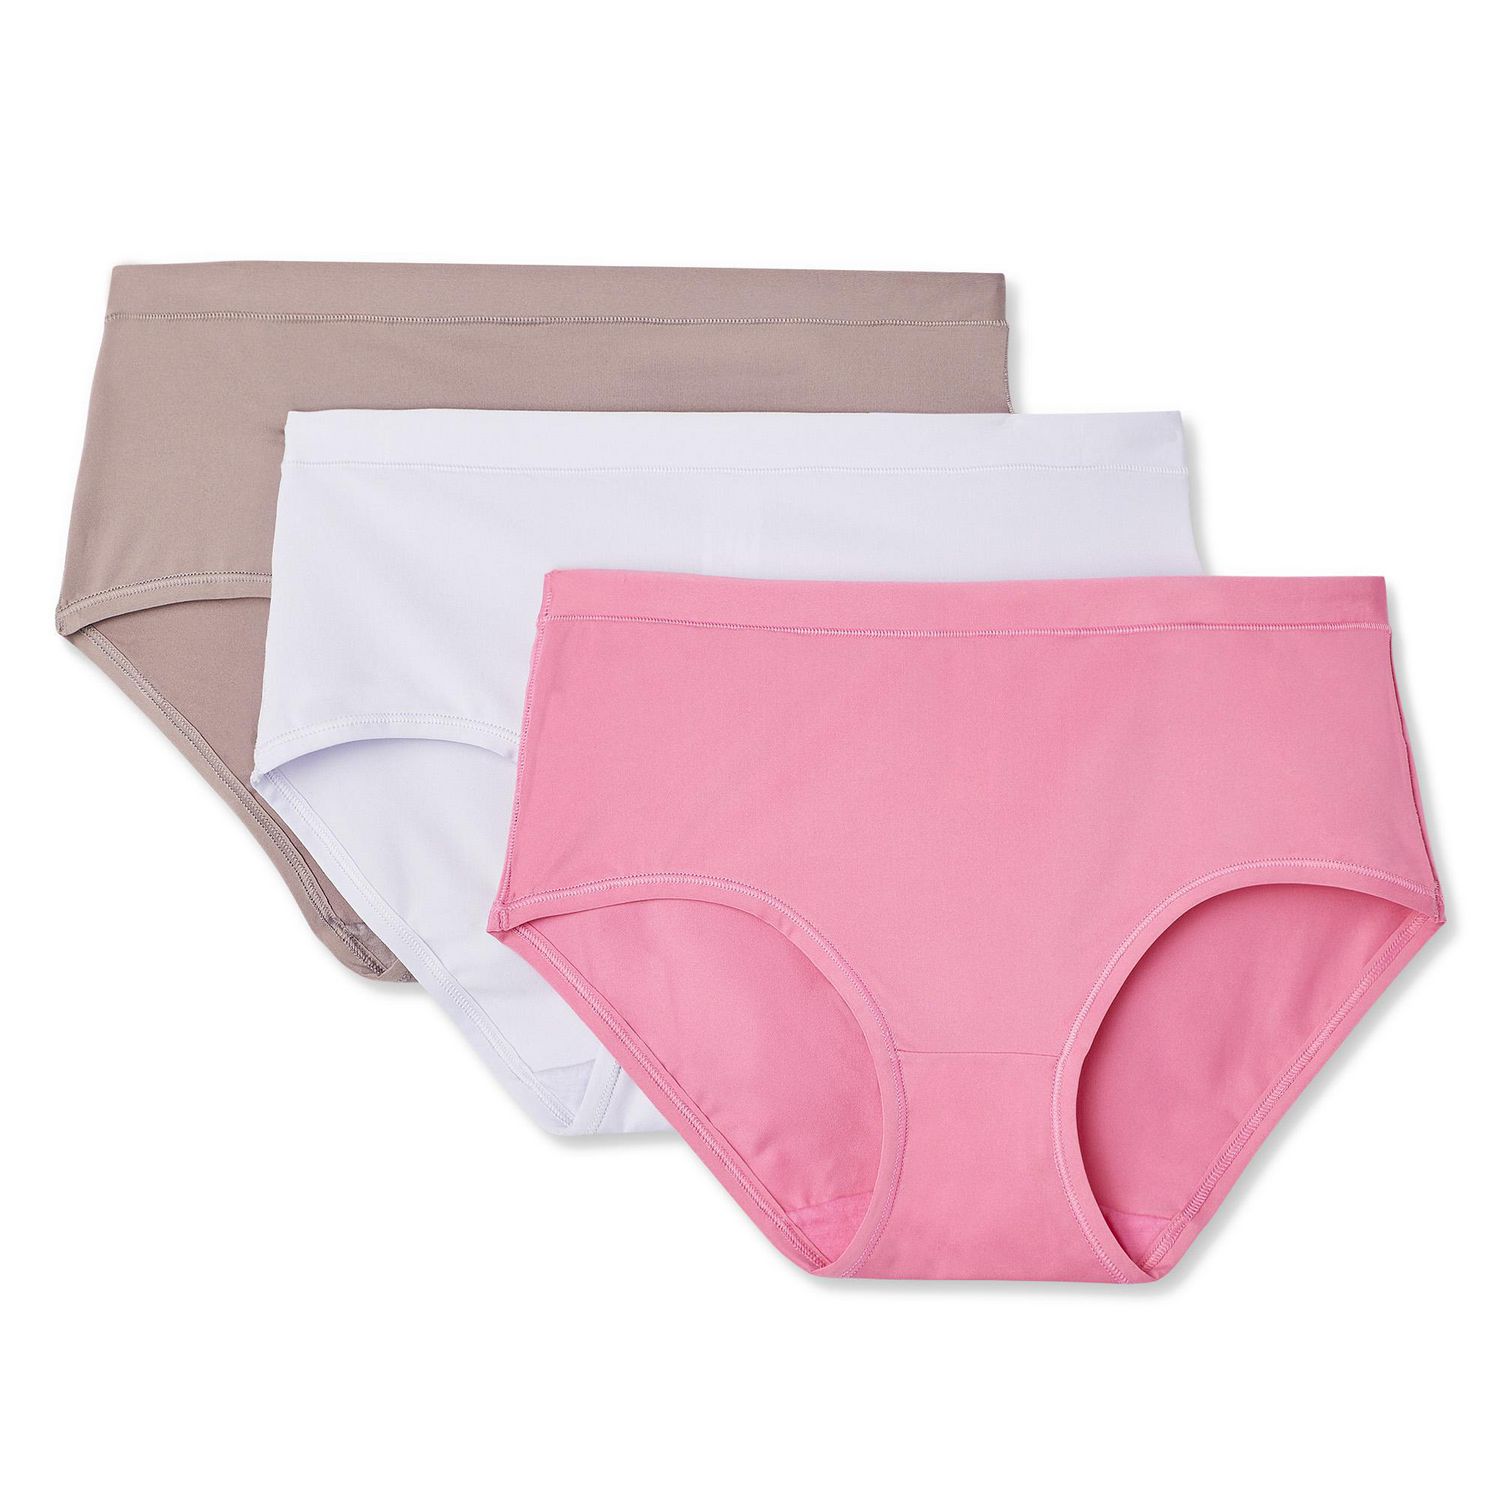 George Girls' Briefs, Pack of 5 